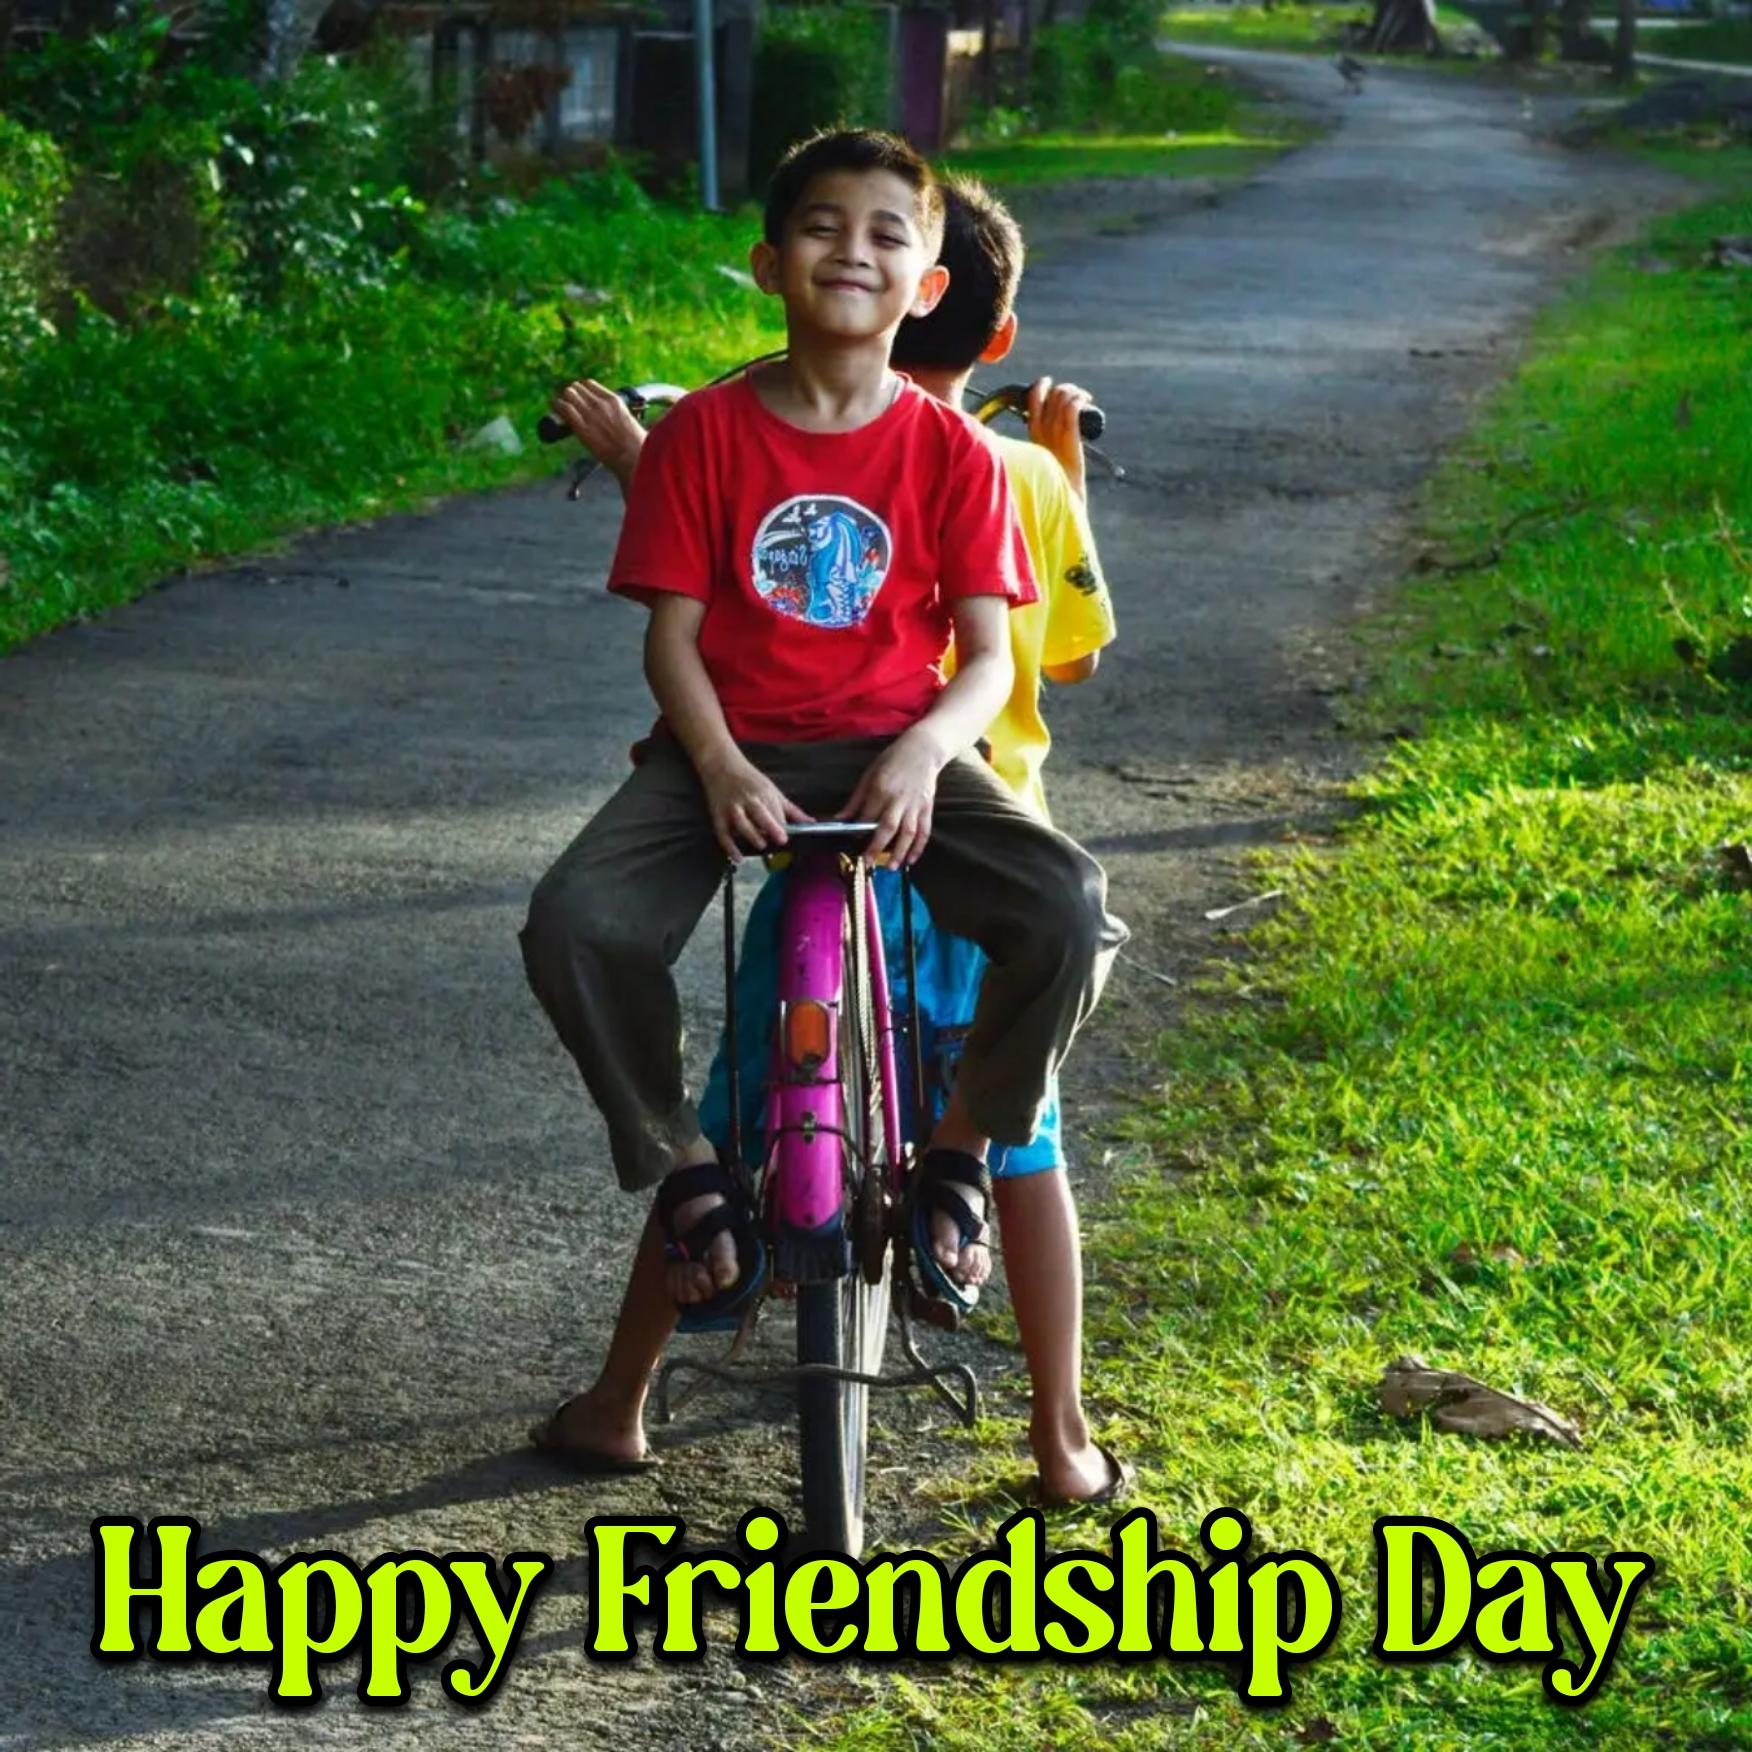 Happy Friendship Day Whatsapp Dp Images